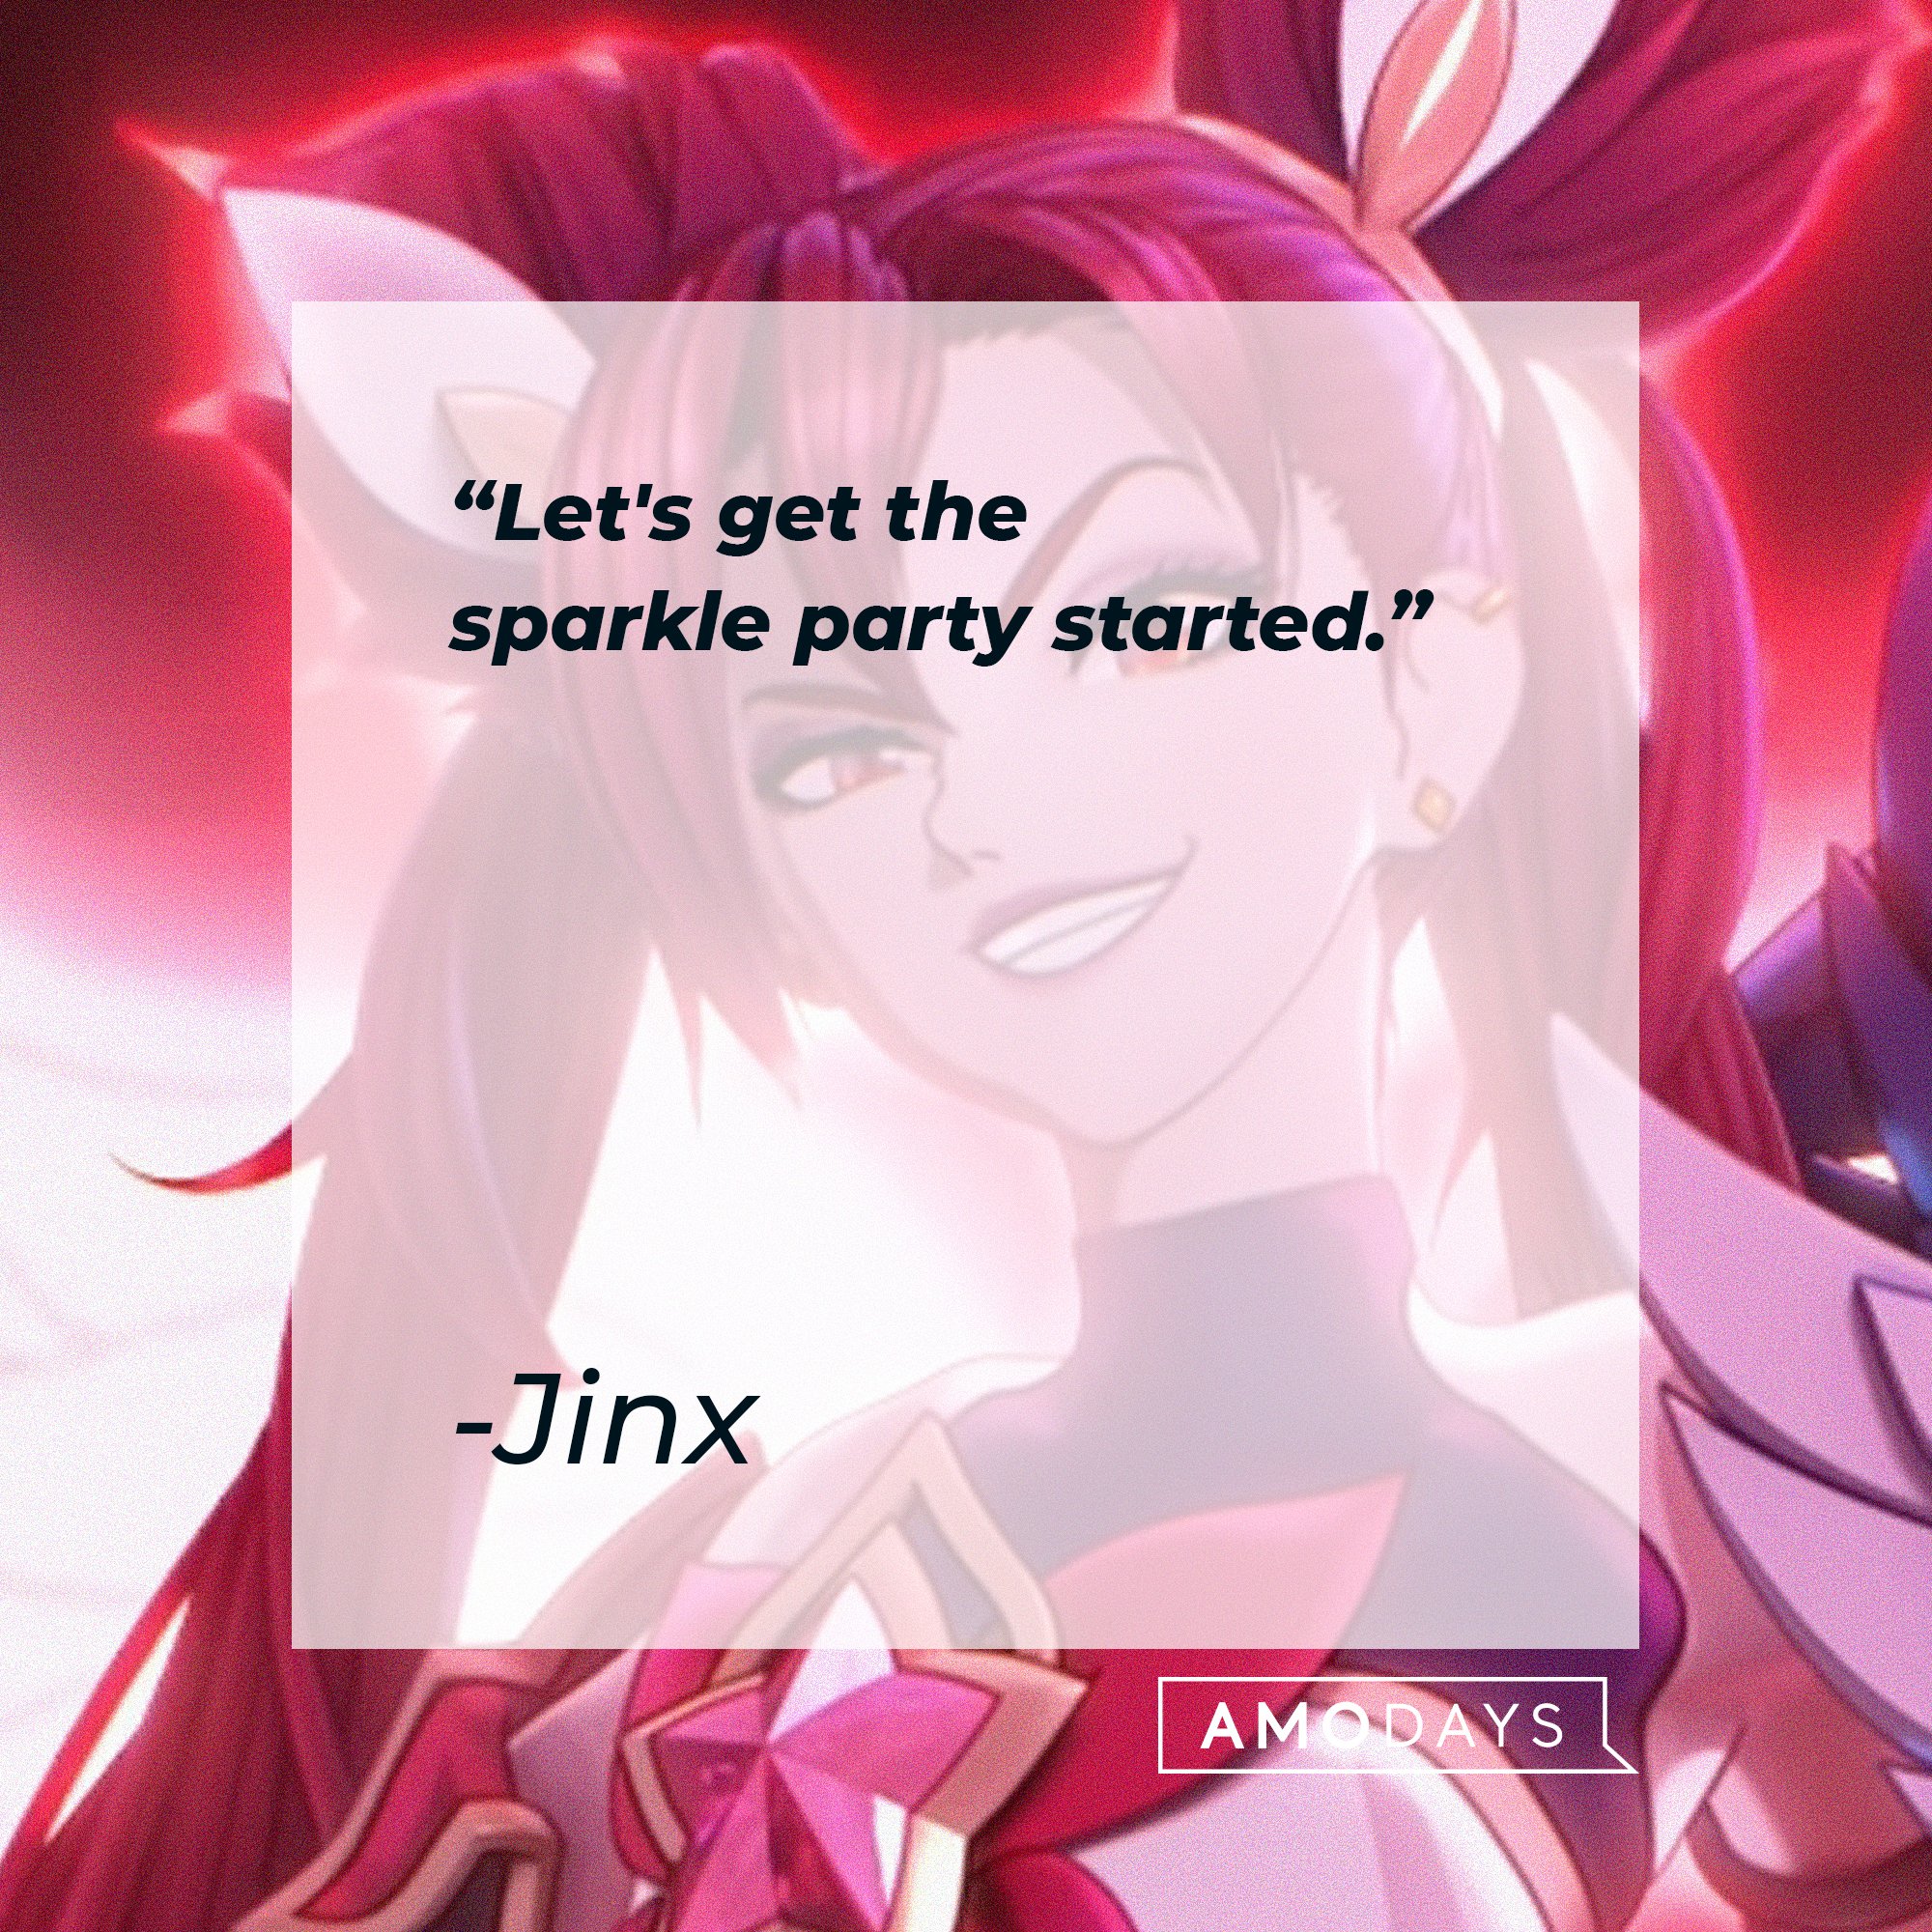 Jinx's quote: "Let's get the sparkle party started!" | Image: AmoDays